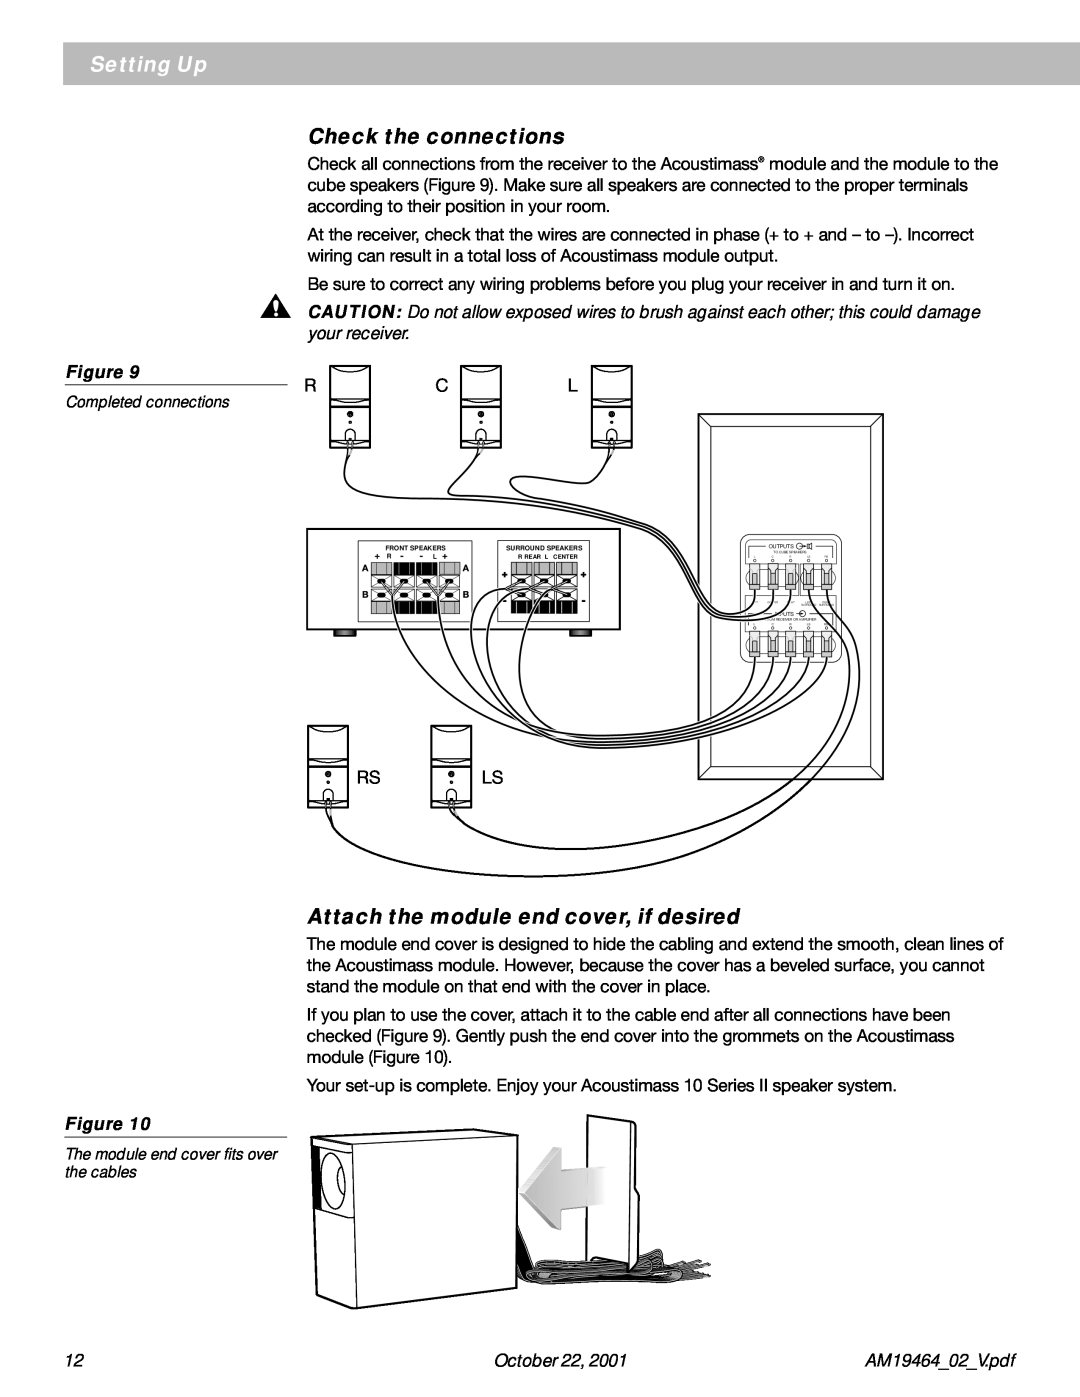 Bose 10 Series II manual Setting Up, Check the connections, Attach the module end cover, if desired, October 